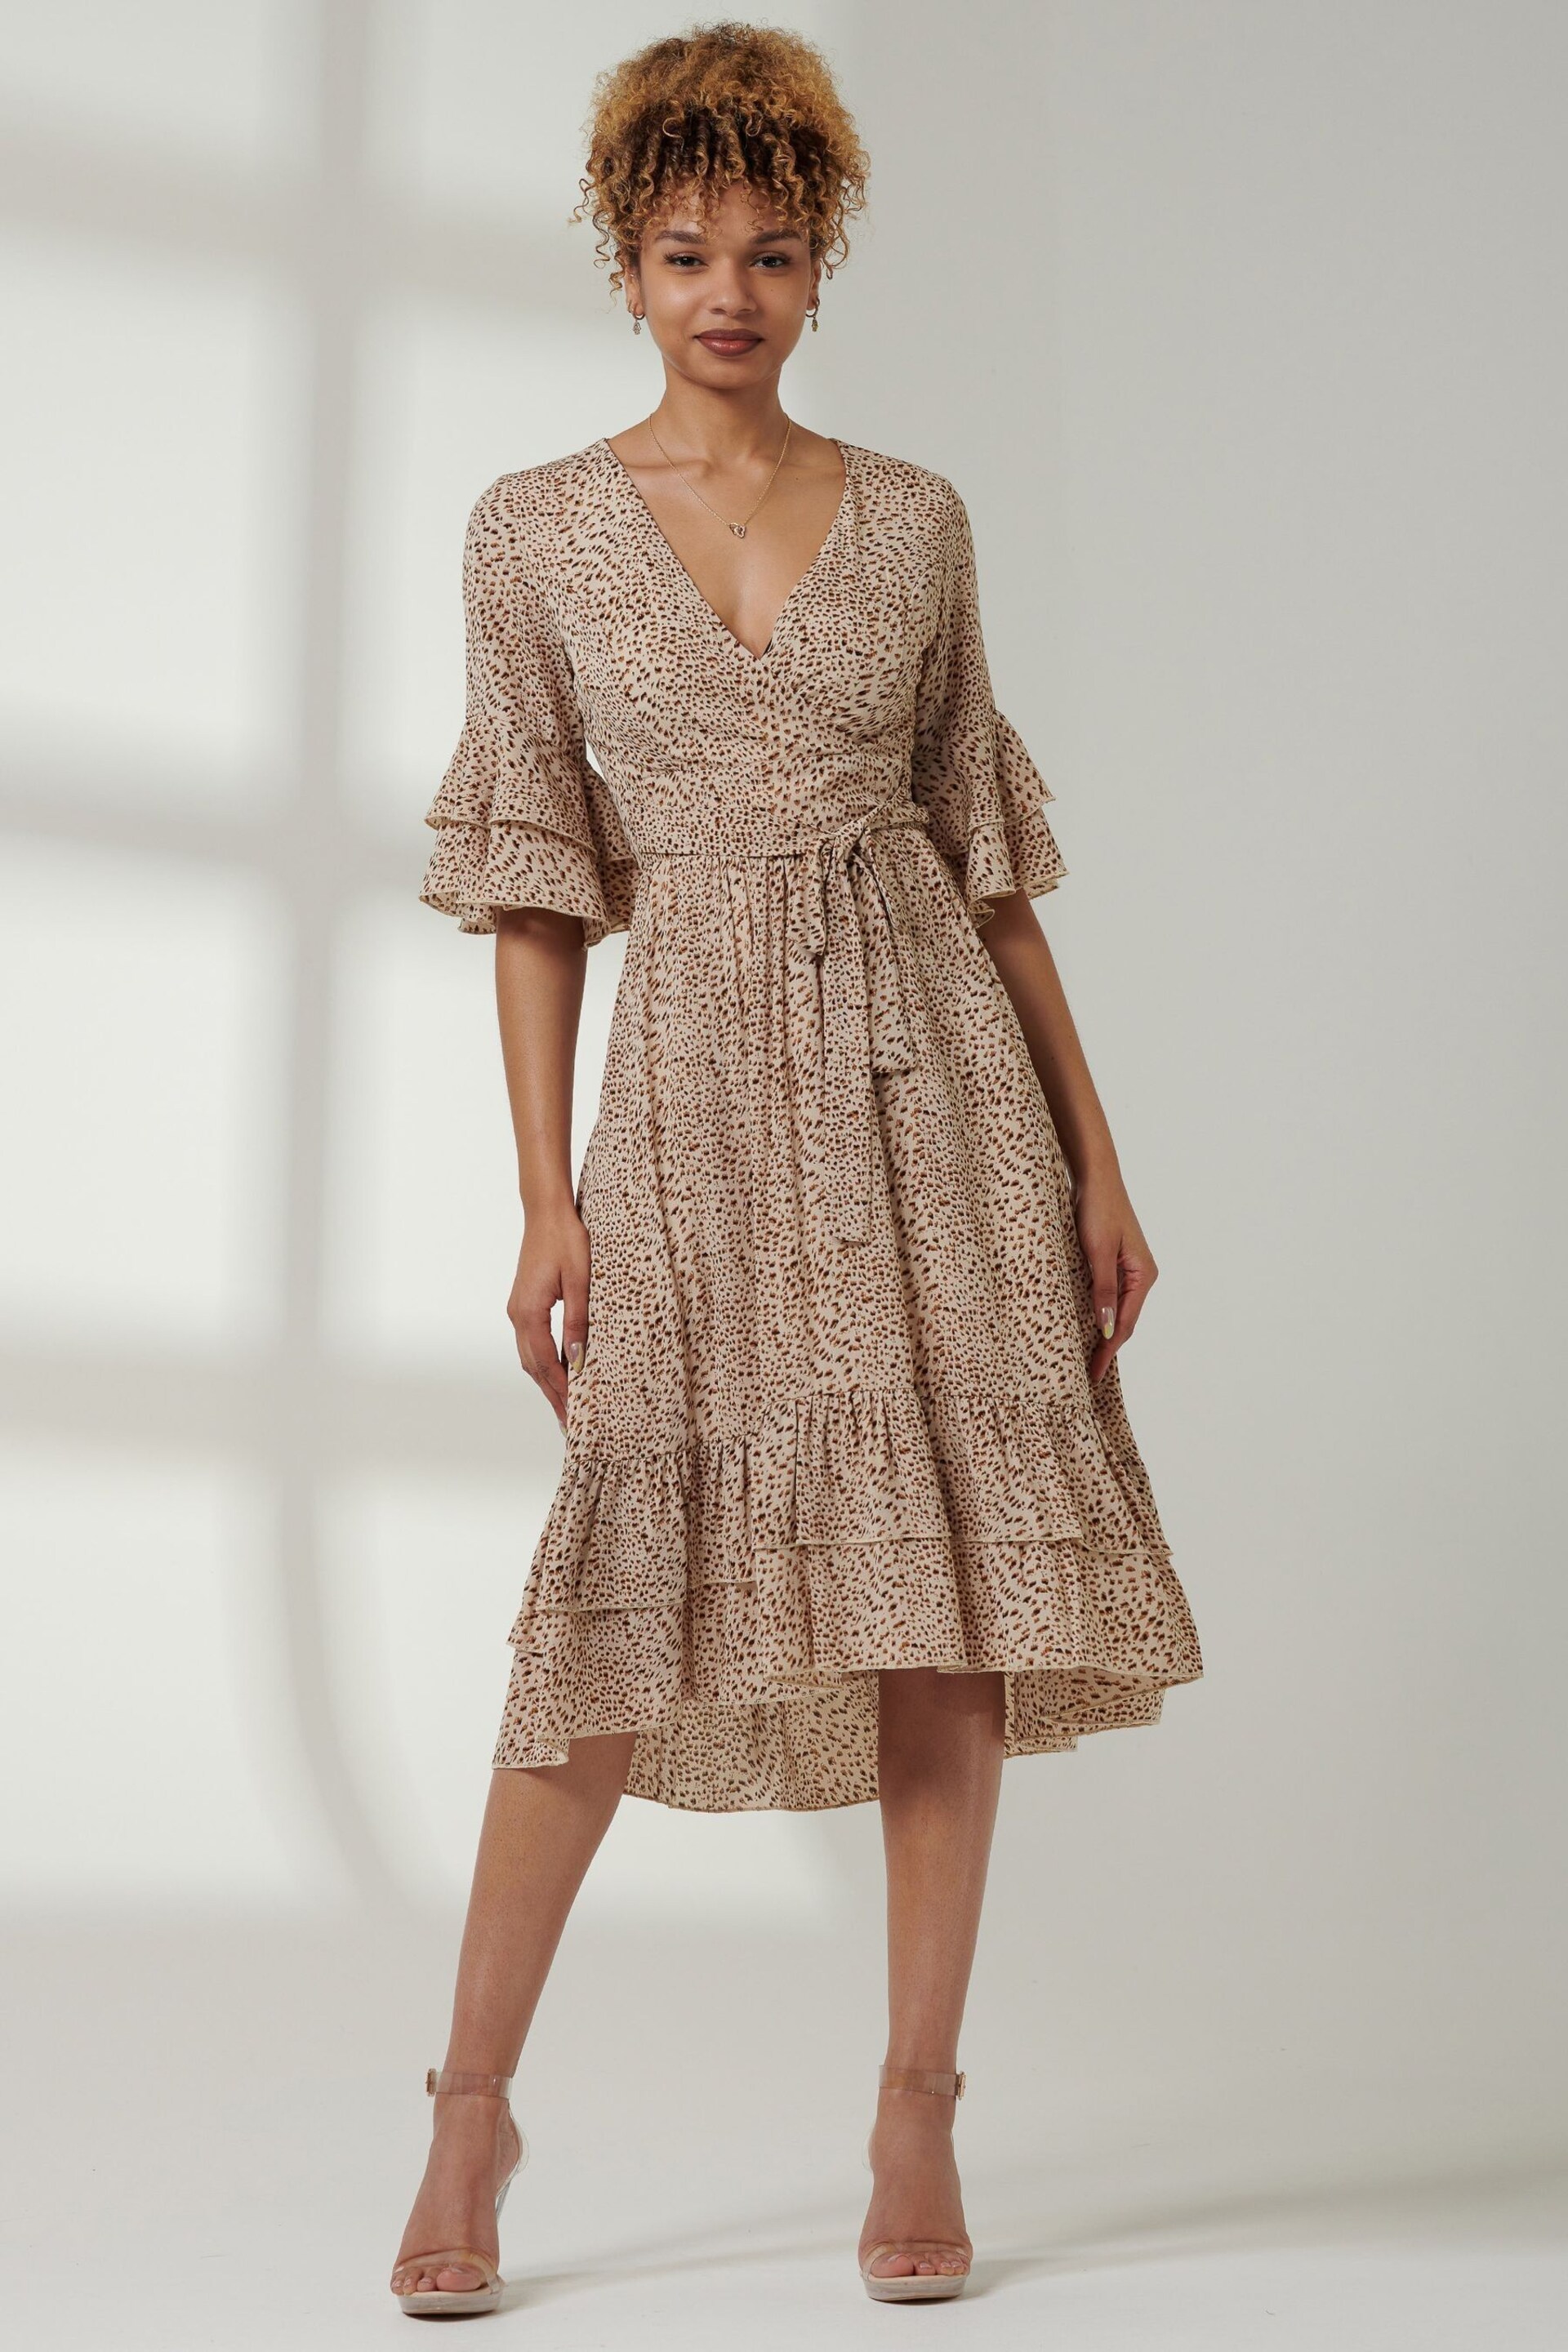 Jolie Moi Brown Tiered Detail Smock Dress - Image 3 of 6